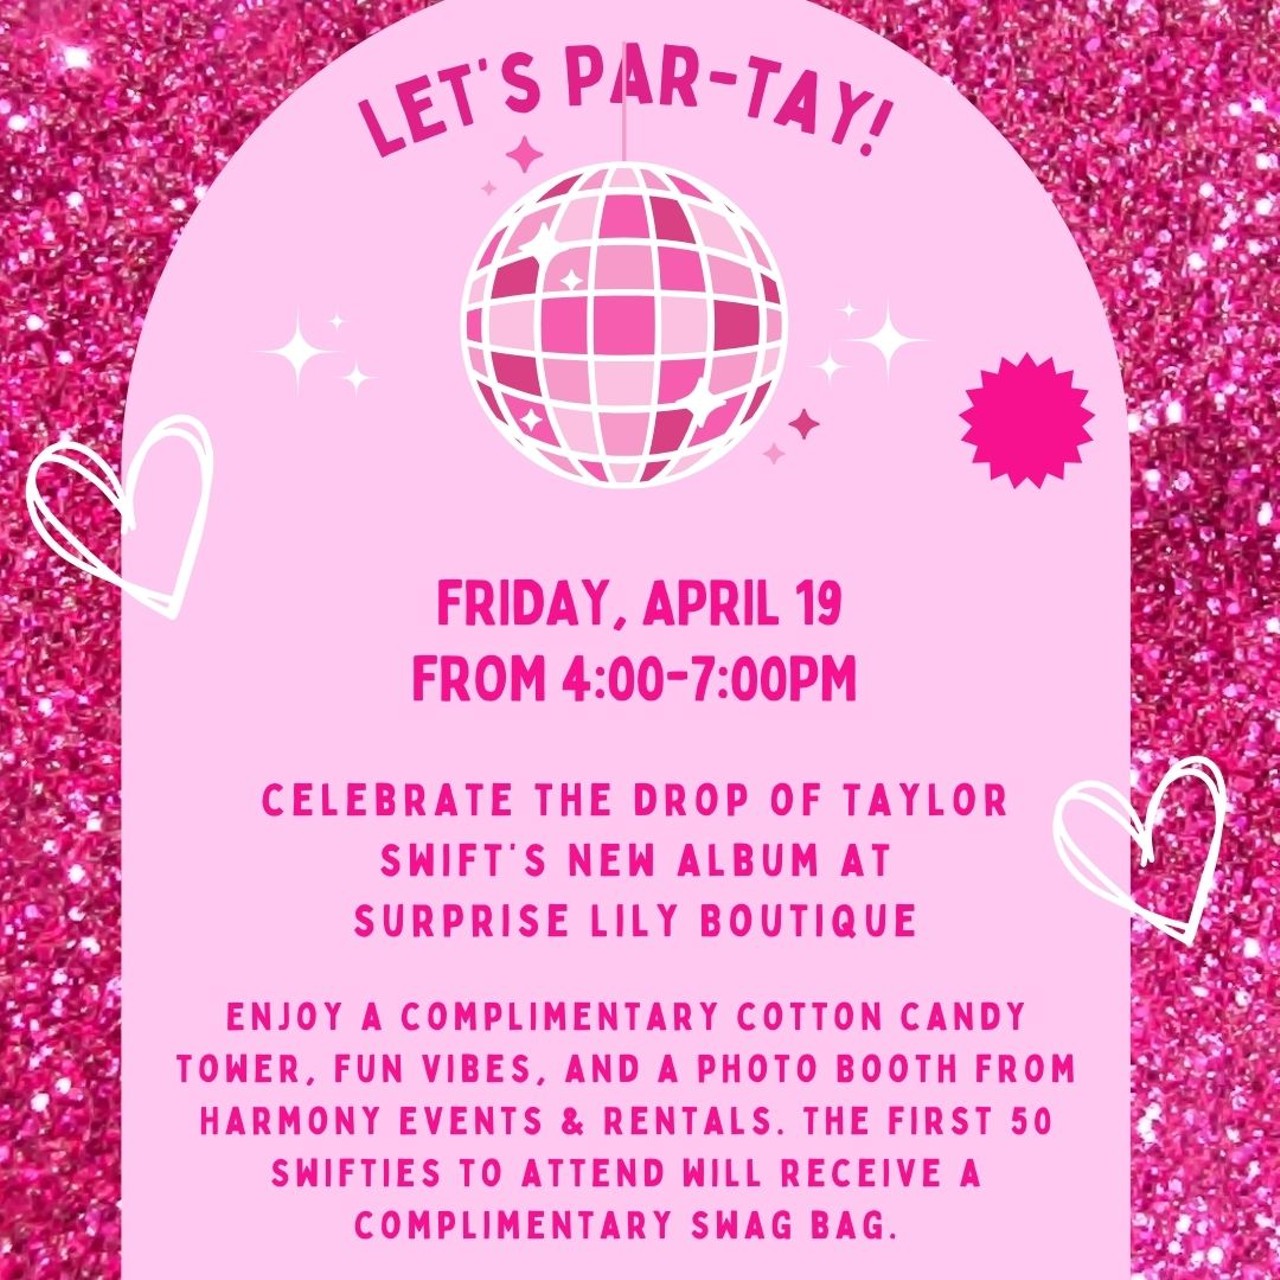 Taylor Swift Launch Party at Surprise Lily Boutique
1386 Bardstown Rd. | Friday, April 19 | 4-7 p.m. Celebrate the drop of Taylor Swift’s new album at Surprise Lily Boutique with a complimentary cotton candy tower, fun vibes, and a photo Booth from Harmony Events & Rentals. The first 50 Swifties to attend will receive a FREE swag bag.